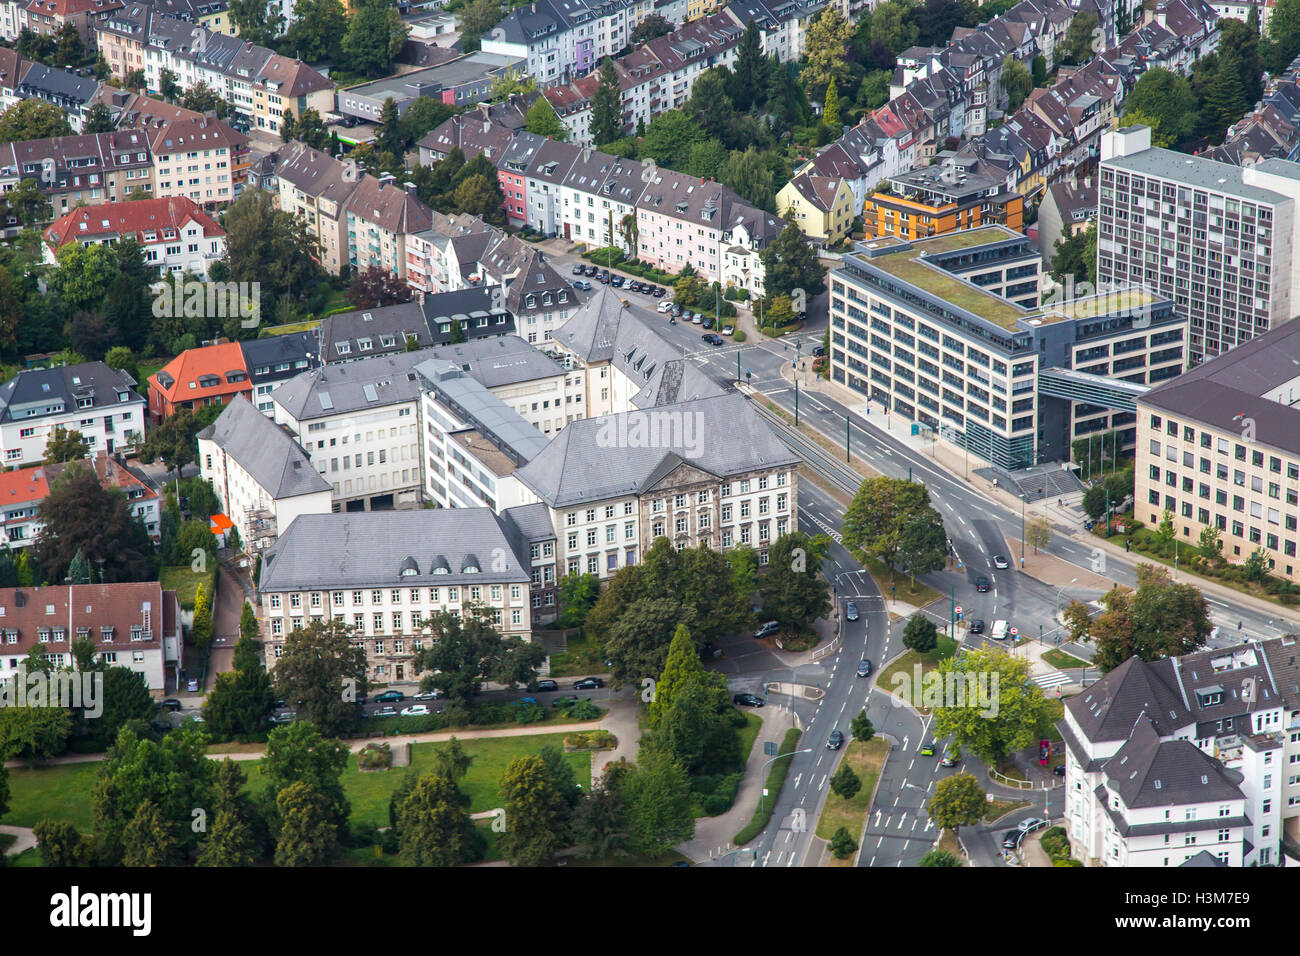 Areal shot of the city of Essen, Germany, city center, downtown area, Police headquarters and justice, court buildings, Stock Photo